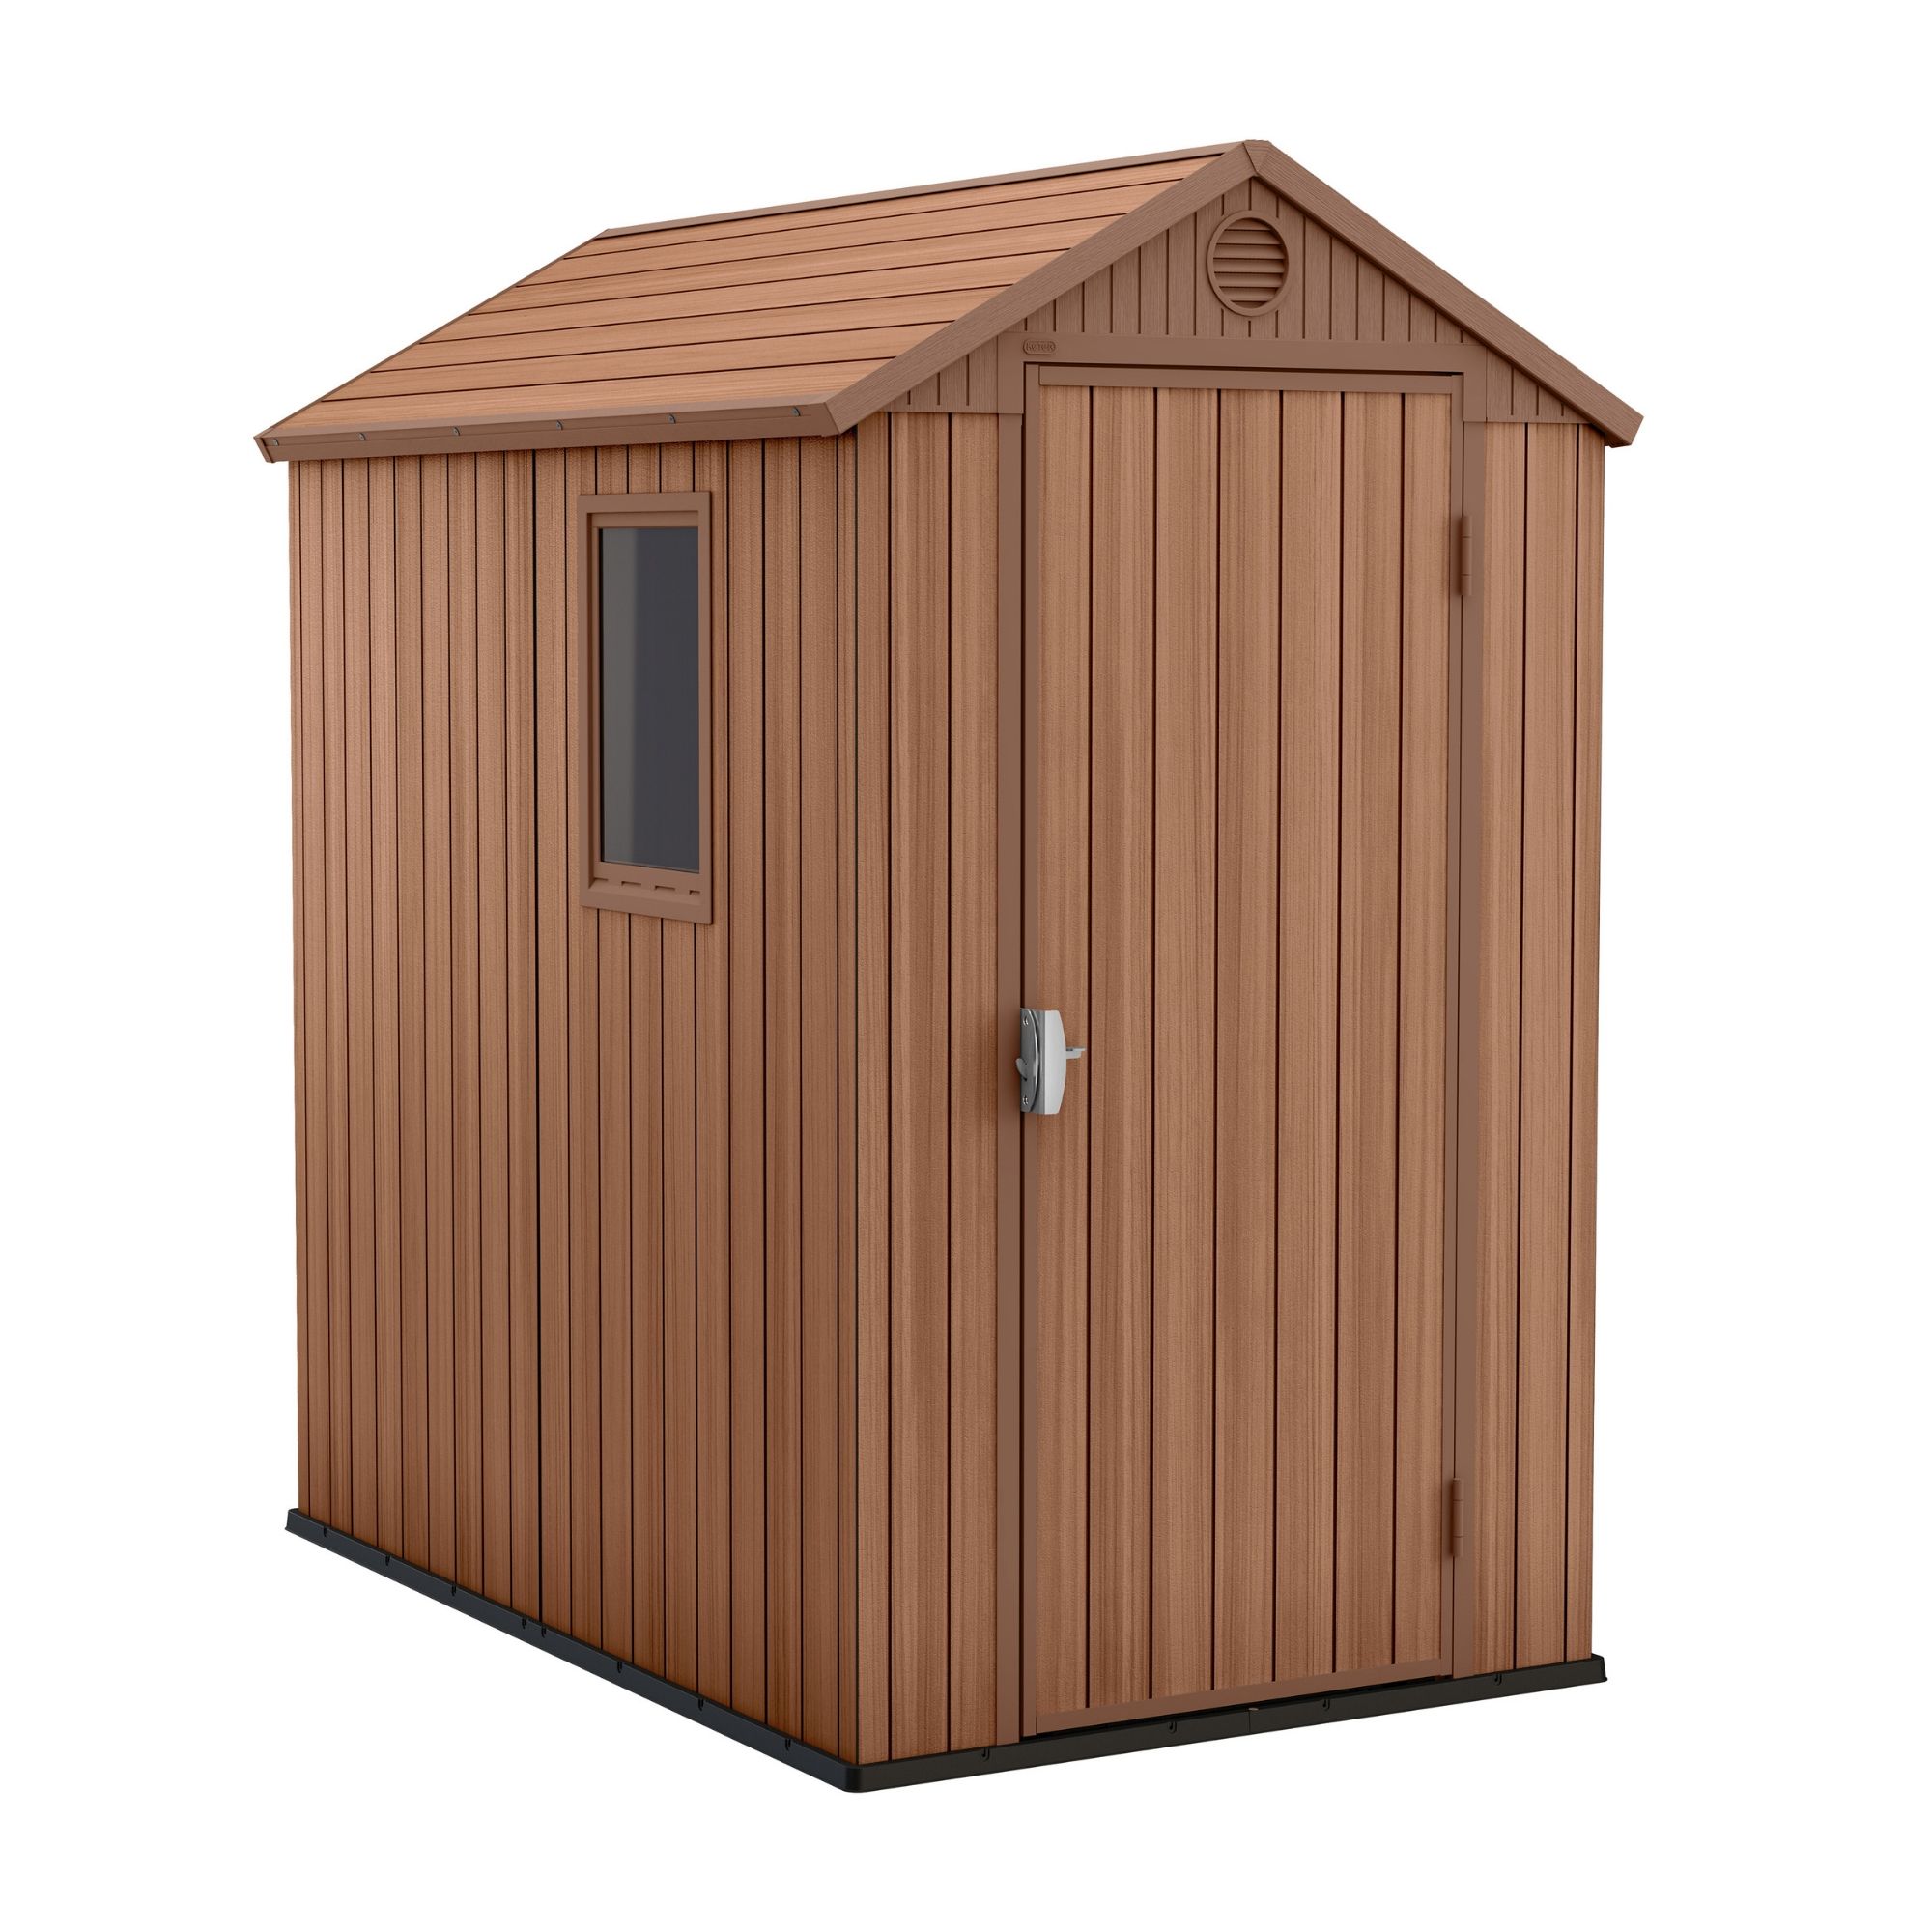 6x4 darwin apex roof tongue & groove plastic shed base